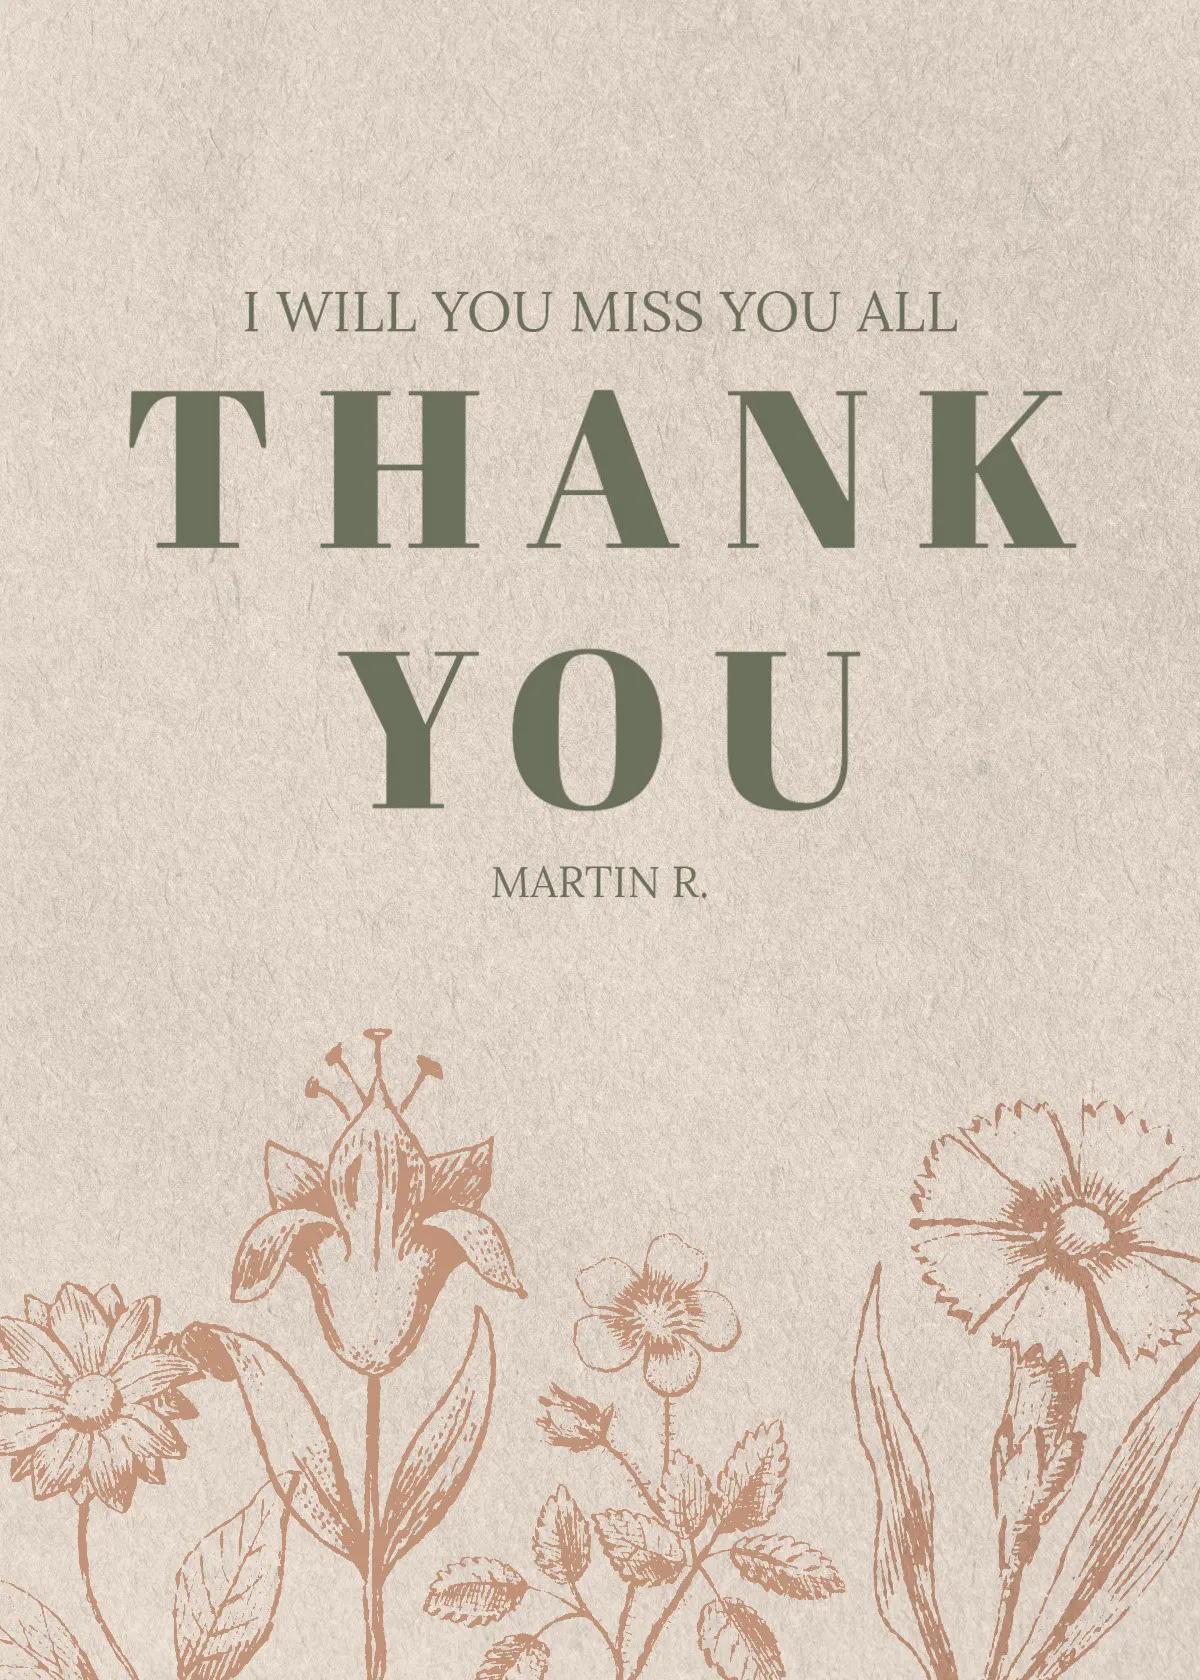 Beige Vintage Paper Texture Floral Elegant Goodbye and Thank You Card